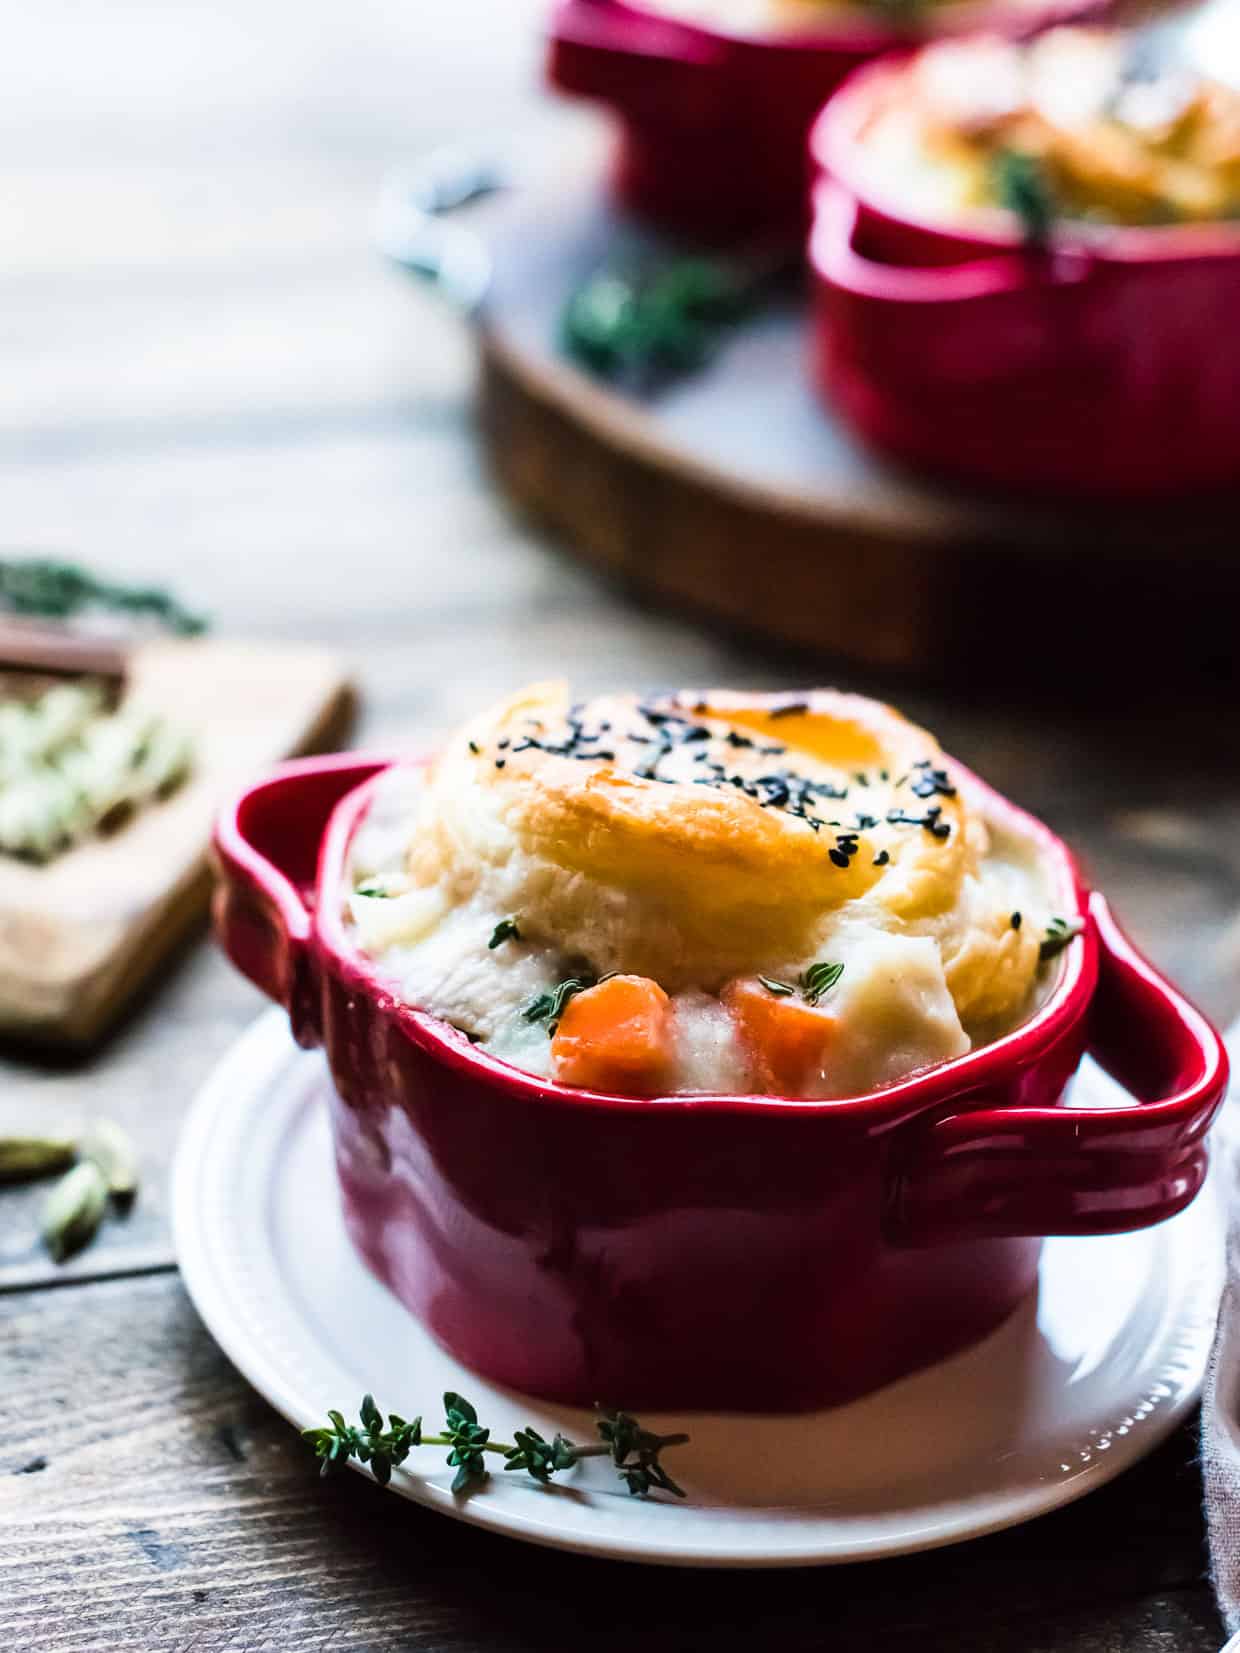 individual serving of chicken pot pie with puff pastry crust in a red serving dish